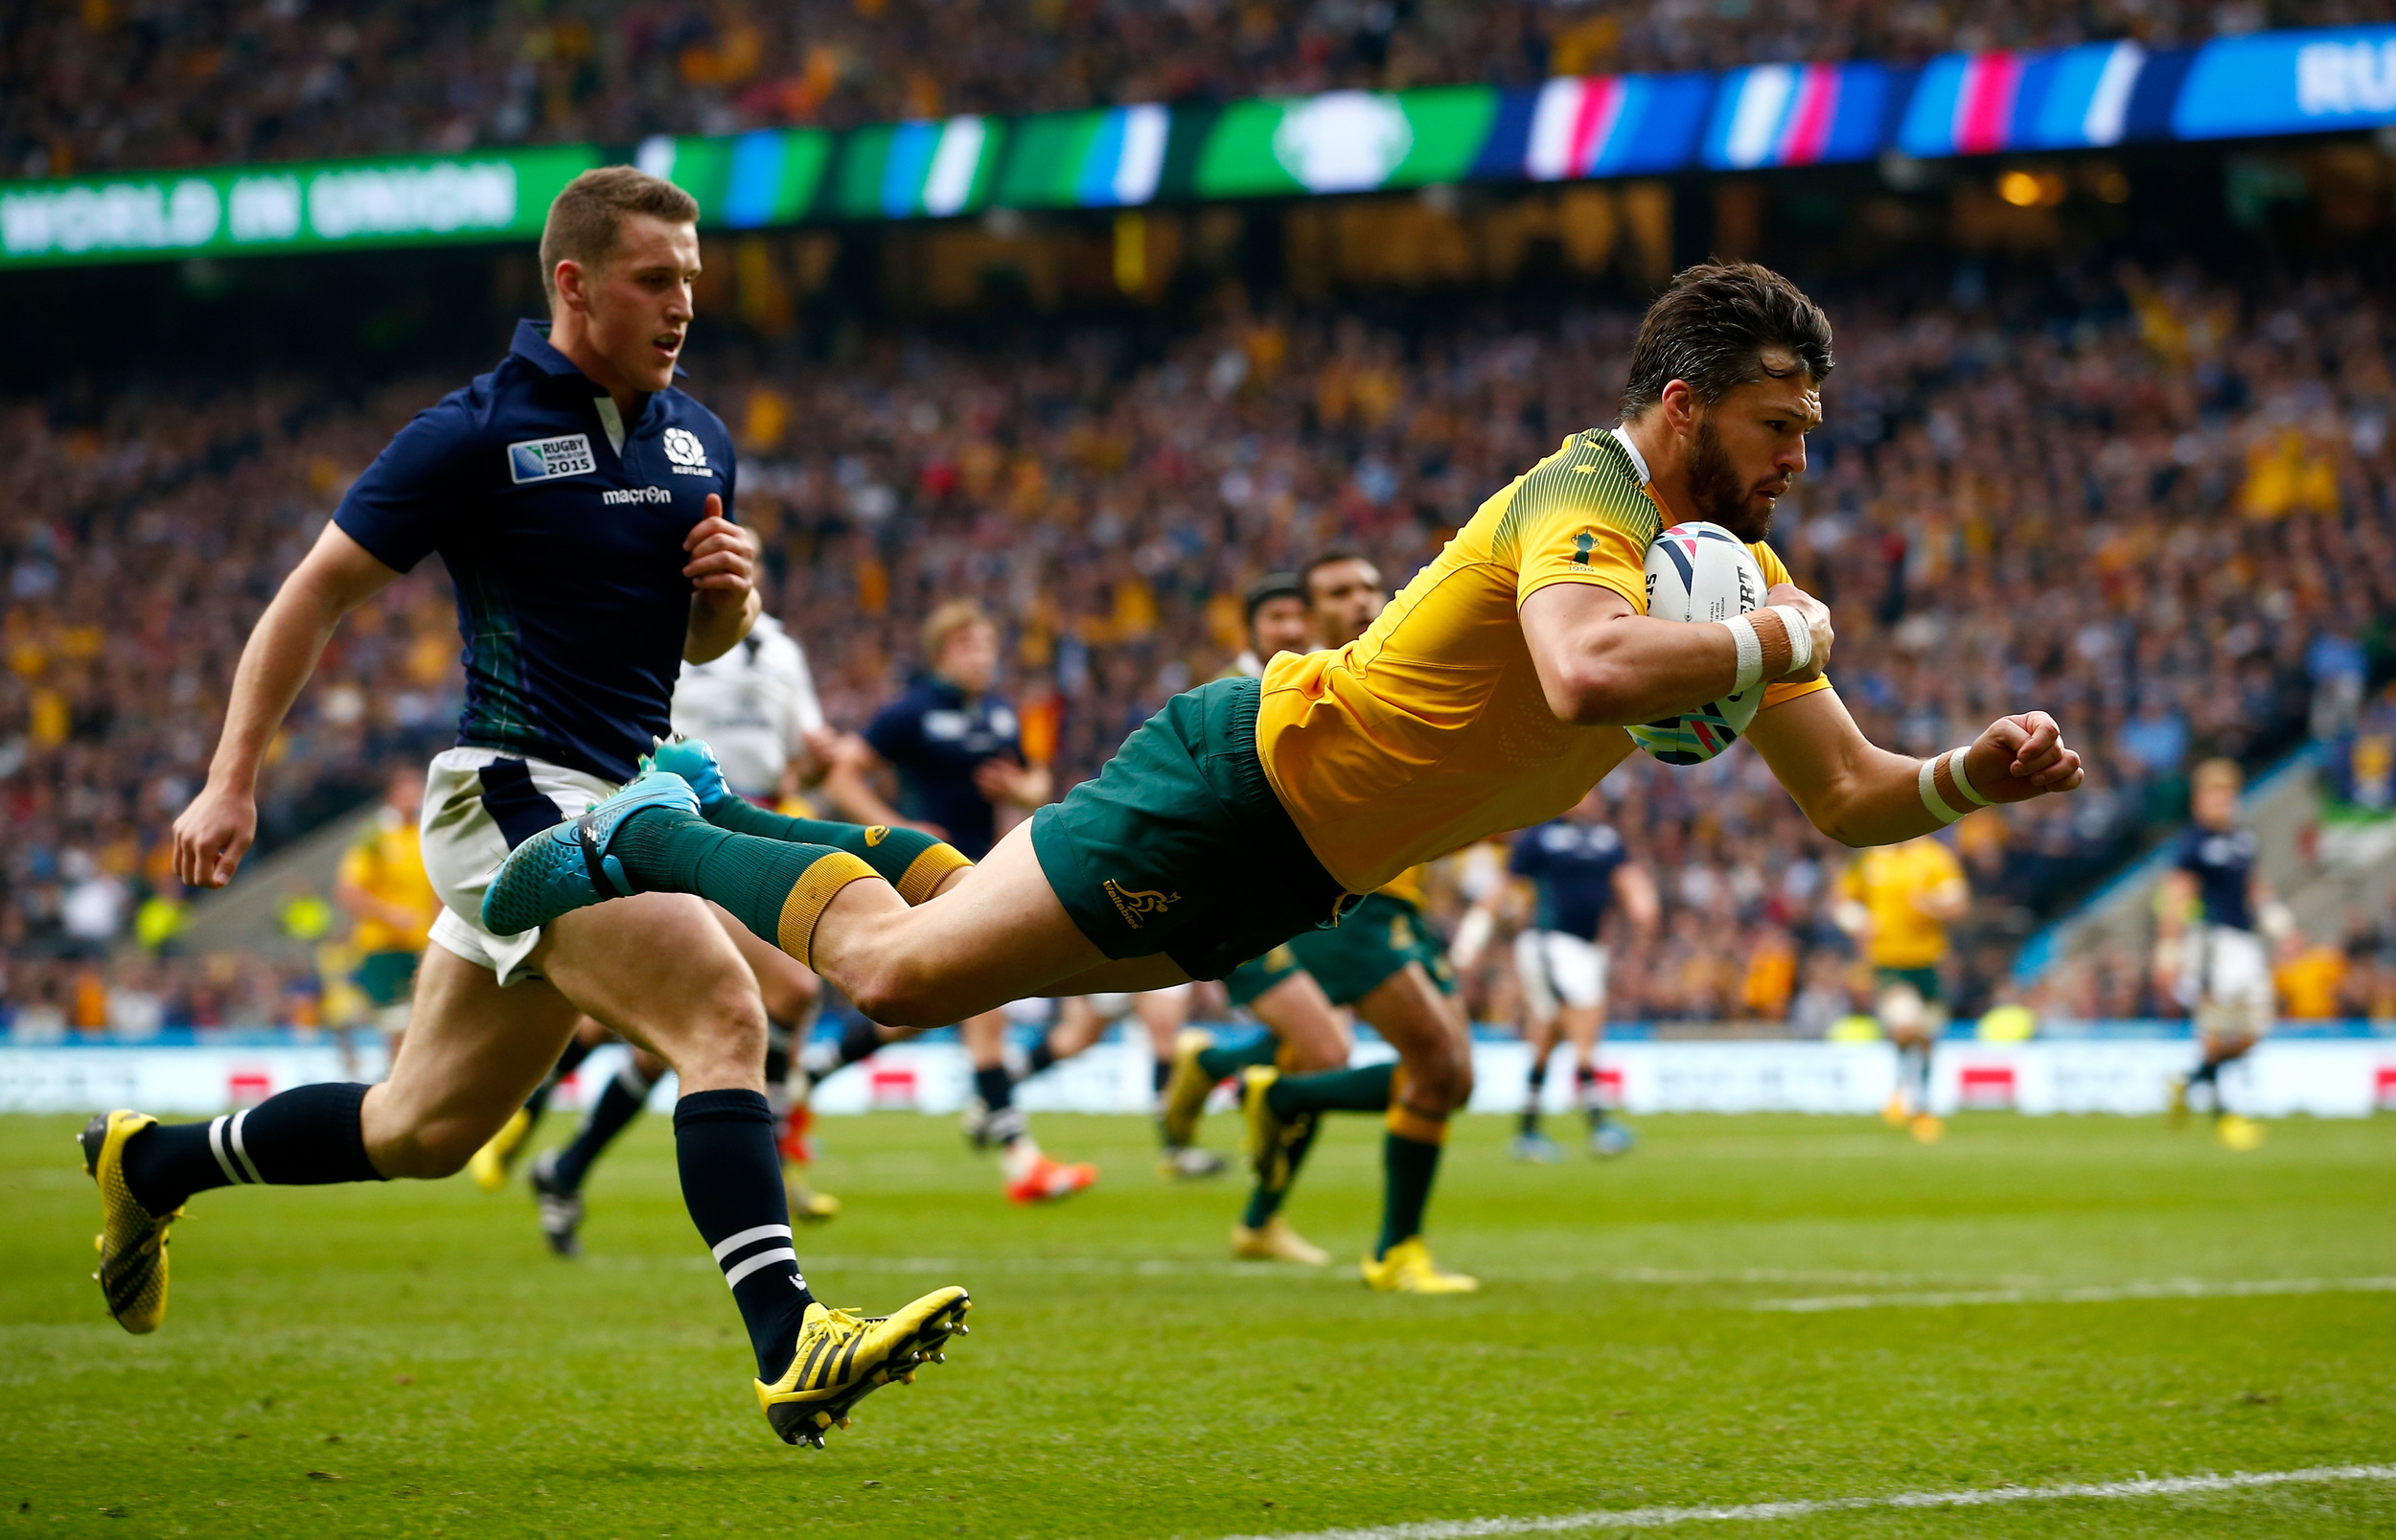  Adam Ashley-Cooper diving in for a try 